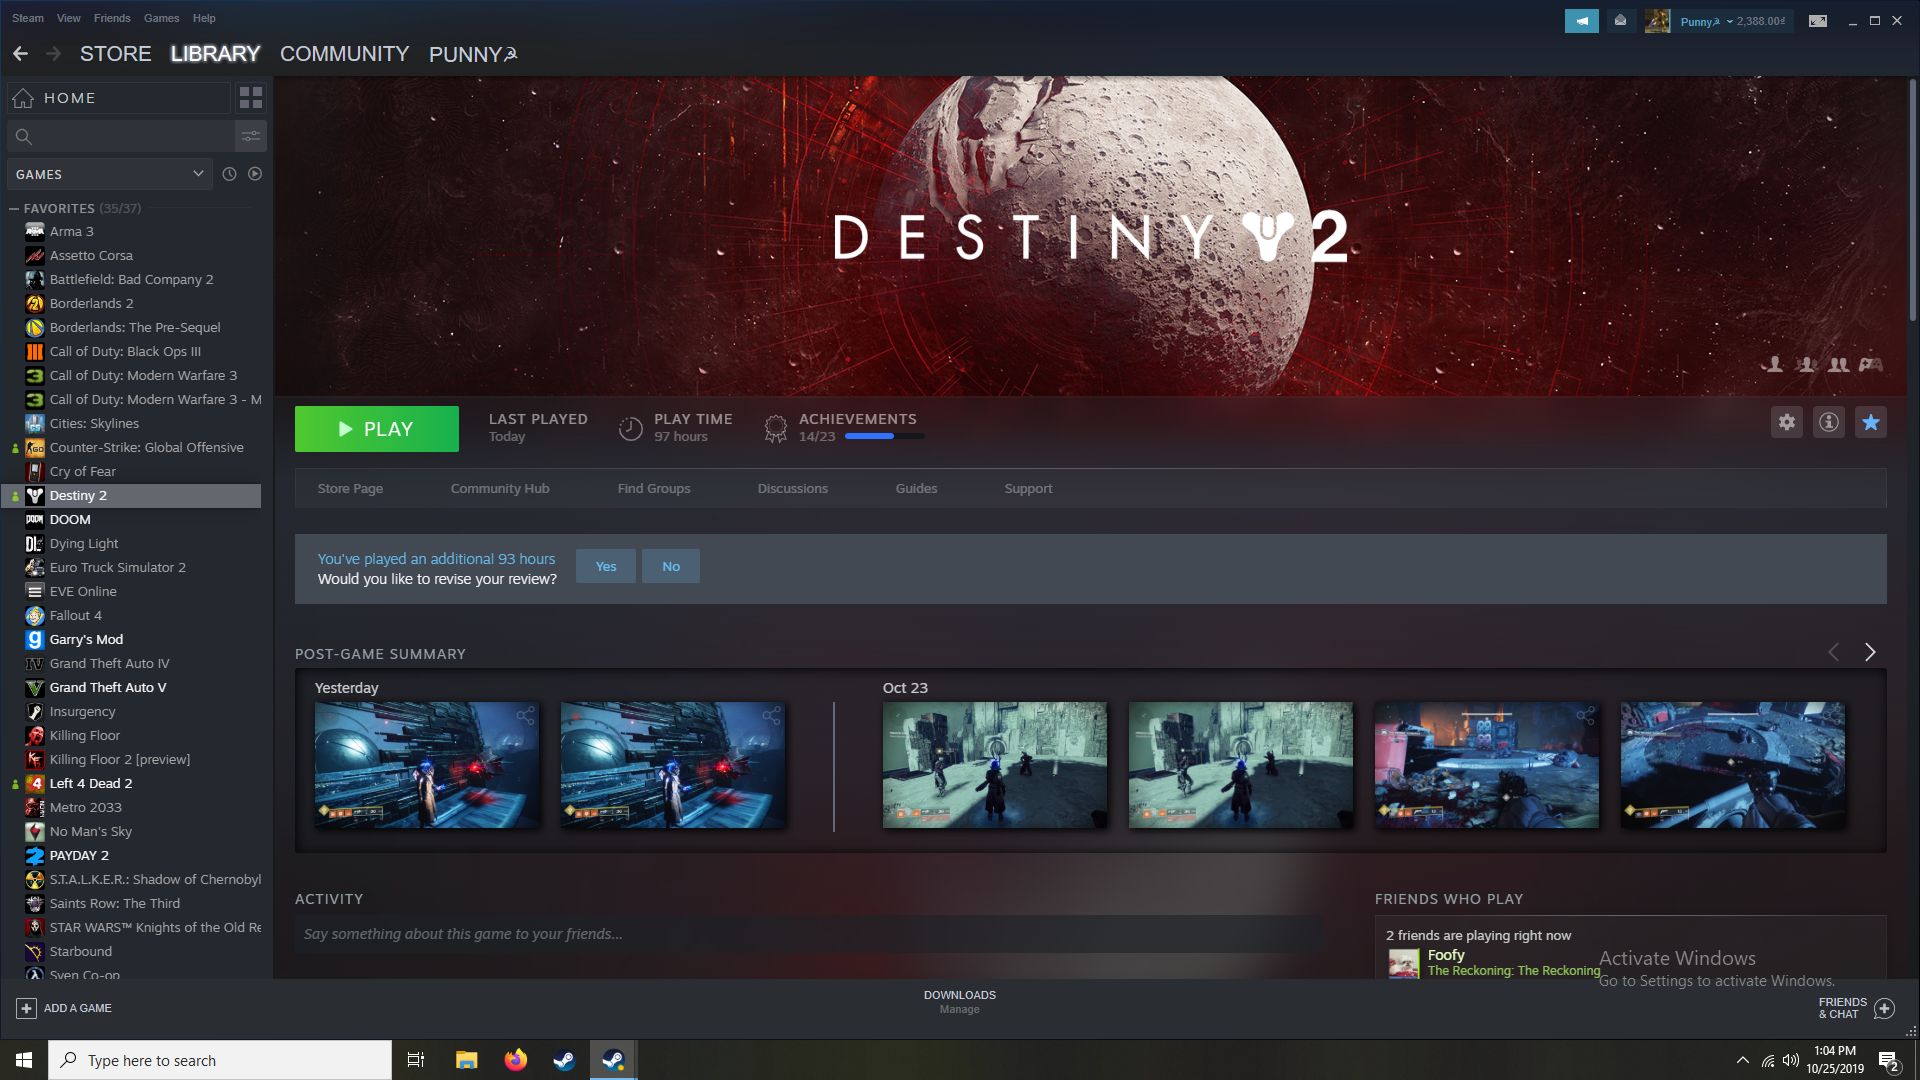 Today Is Your Final Chance To Move Your Destiny 2 Account To Steam From Battlenet 